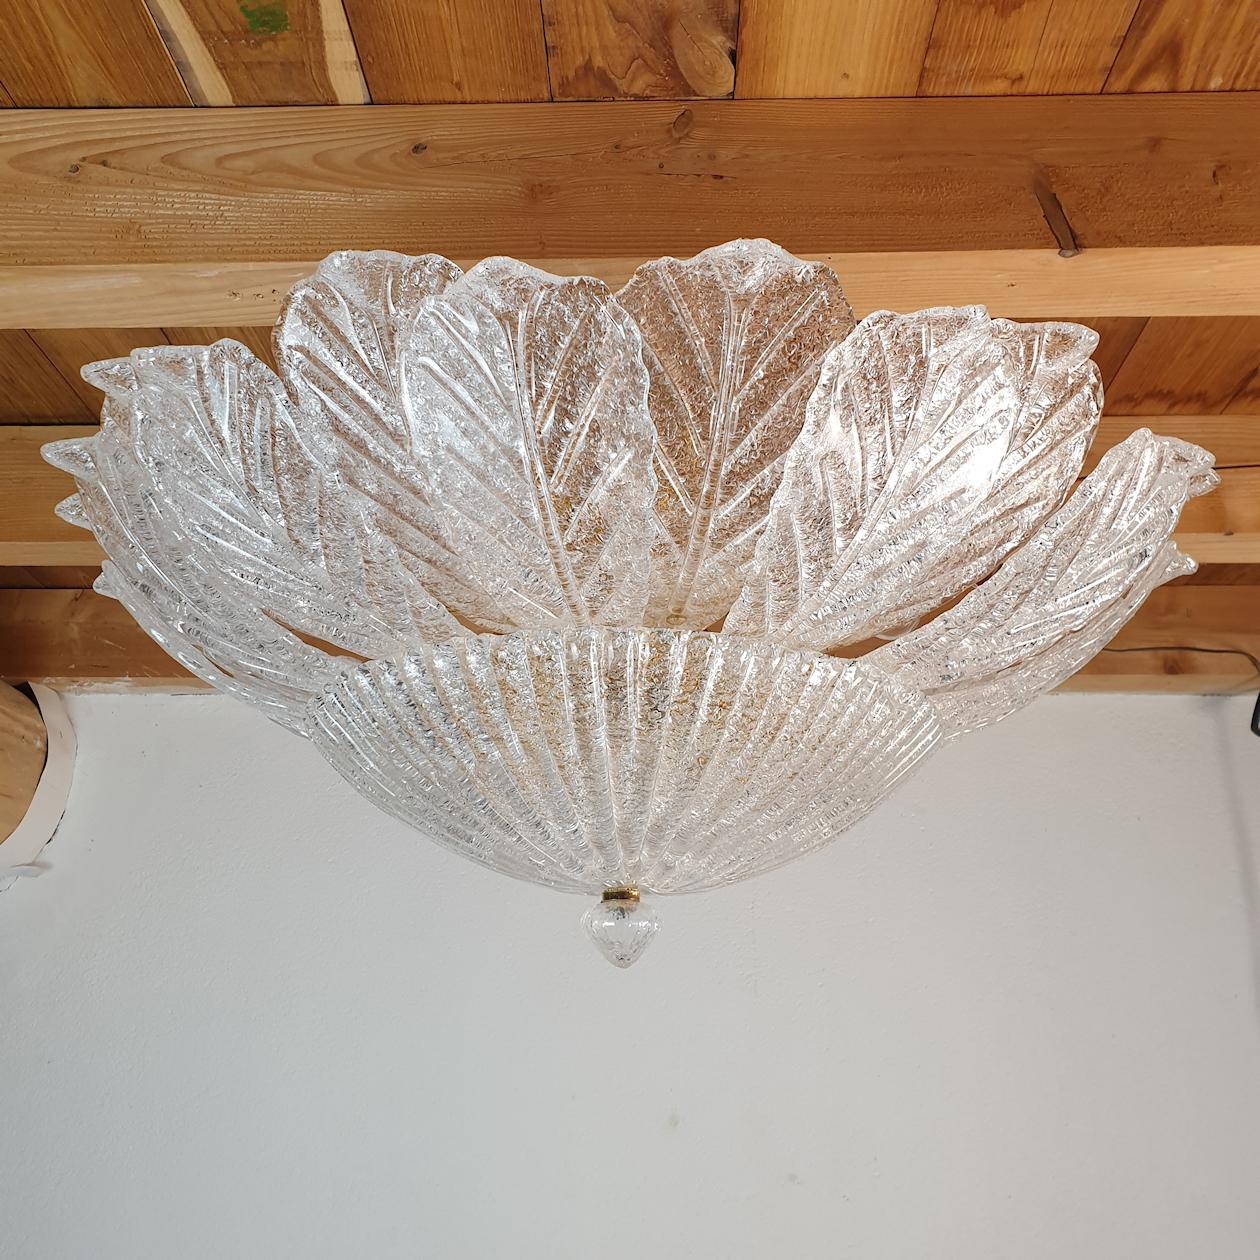 Large Neoclassical style Murano glass flush mount chandelier, by Barovier and Toso, Italy 1970s.
The Mid-Century Modern chandelier is made of hand made Murano glass textured leaves and a gold plated frame.
The vintage flush mount light has 9